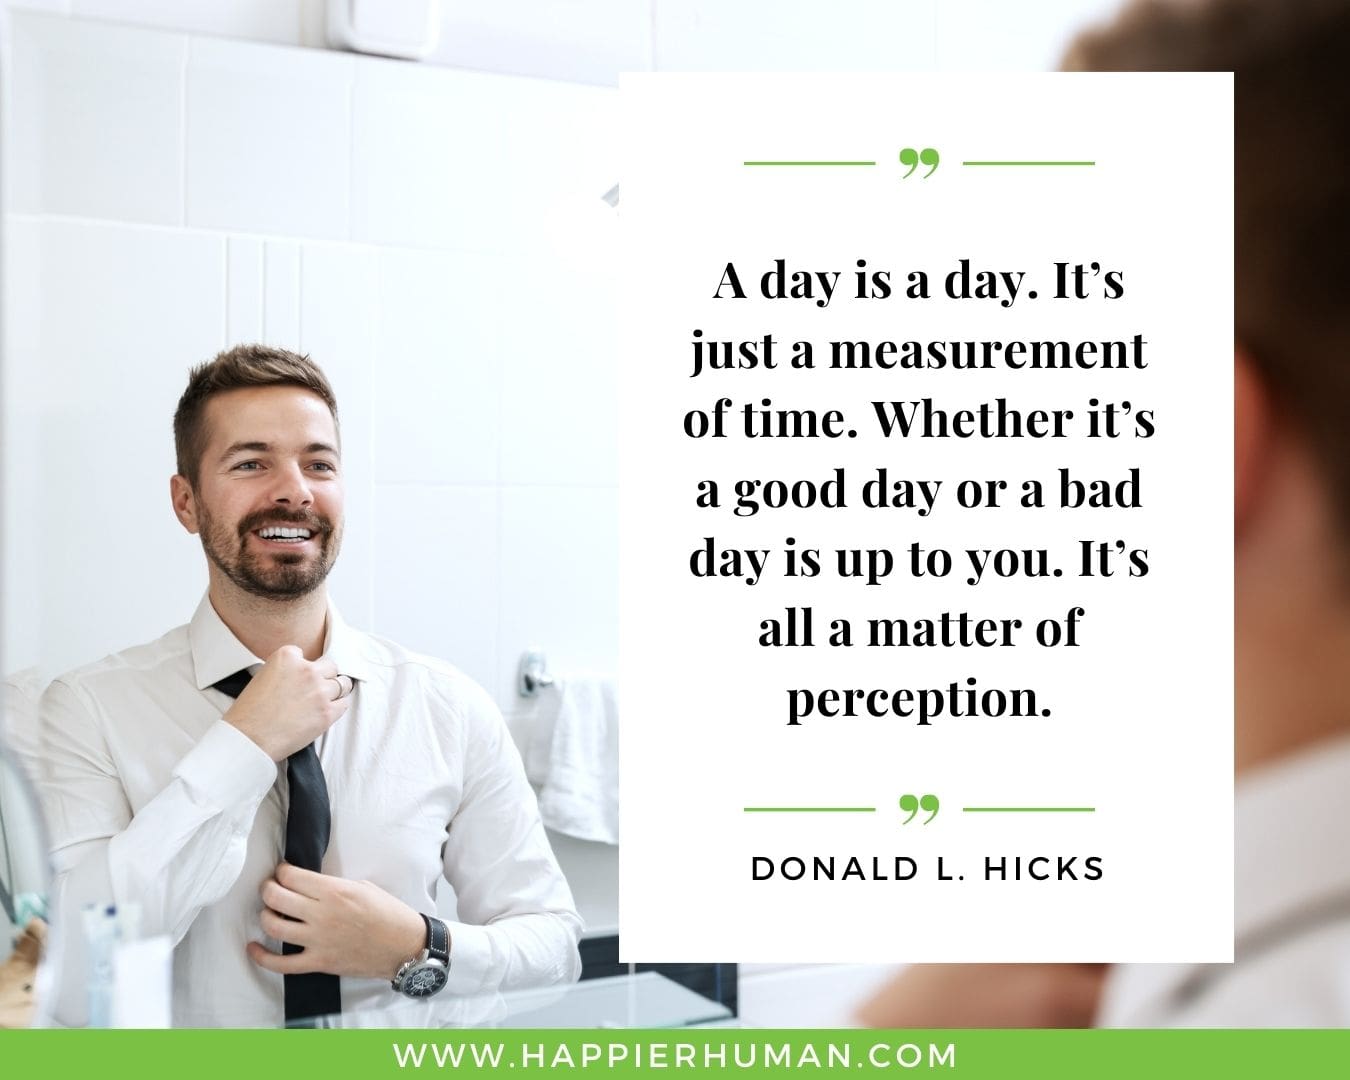 Great Day Quotes - “A day is a day. It’s just a measurement of time. Whether it’s a good day or a bad day is up to you. It’s all a matter of perception.” – Donald L. Hicks